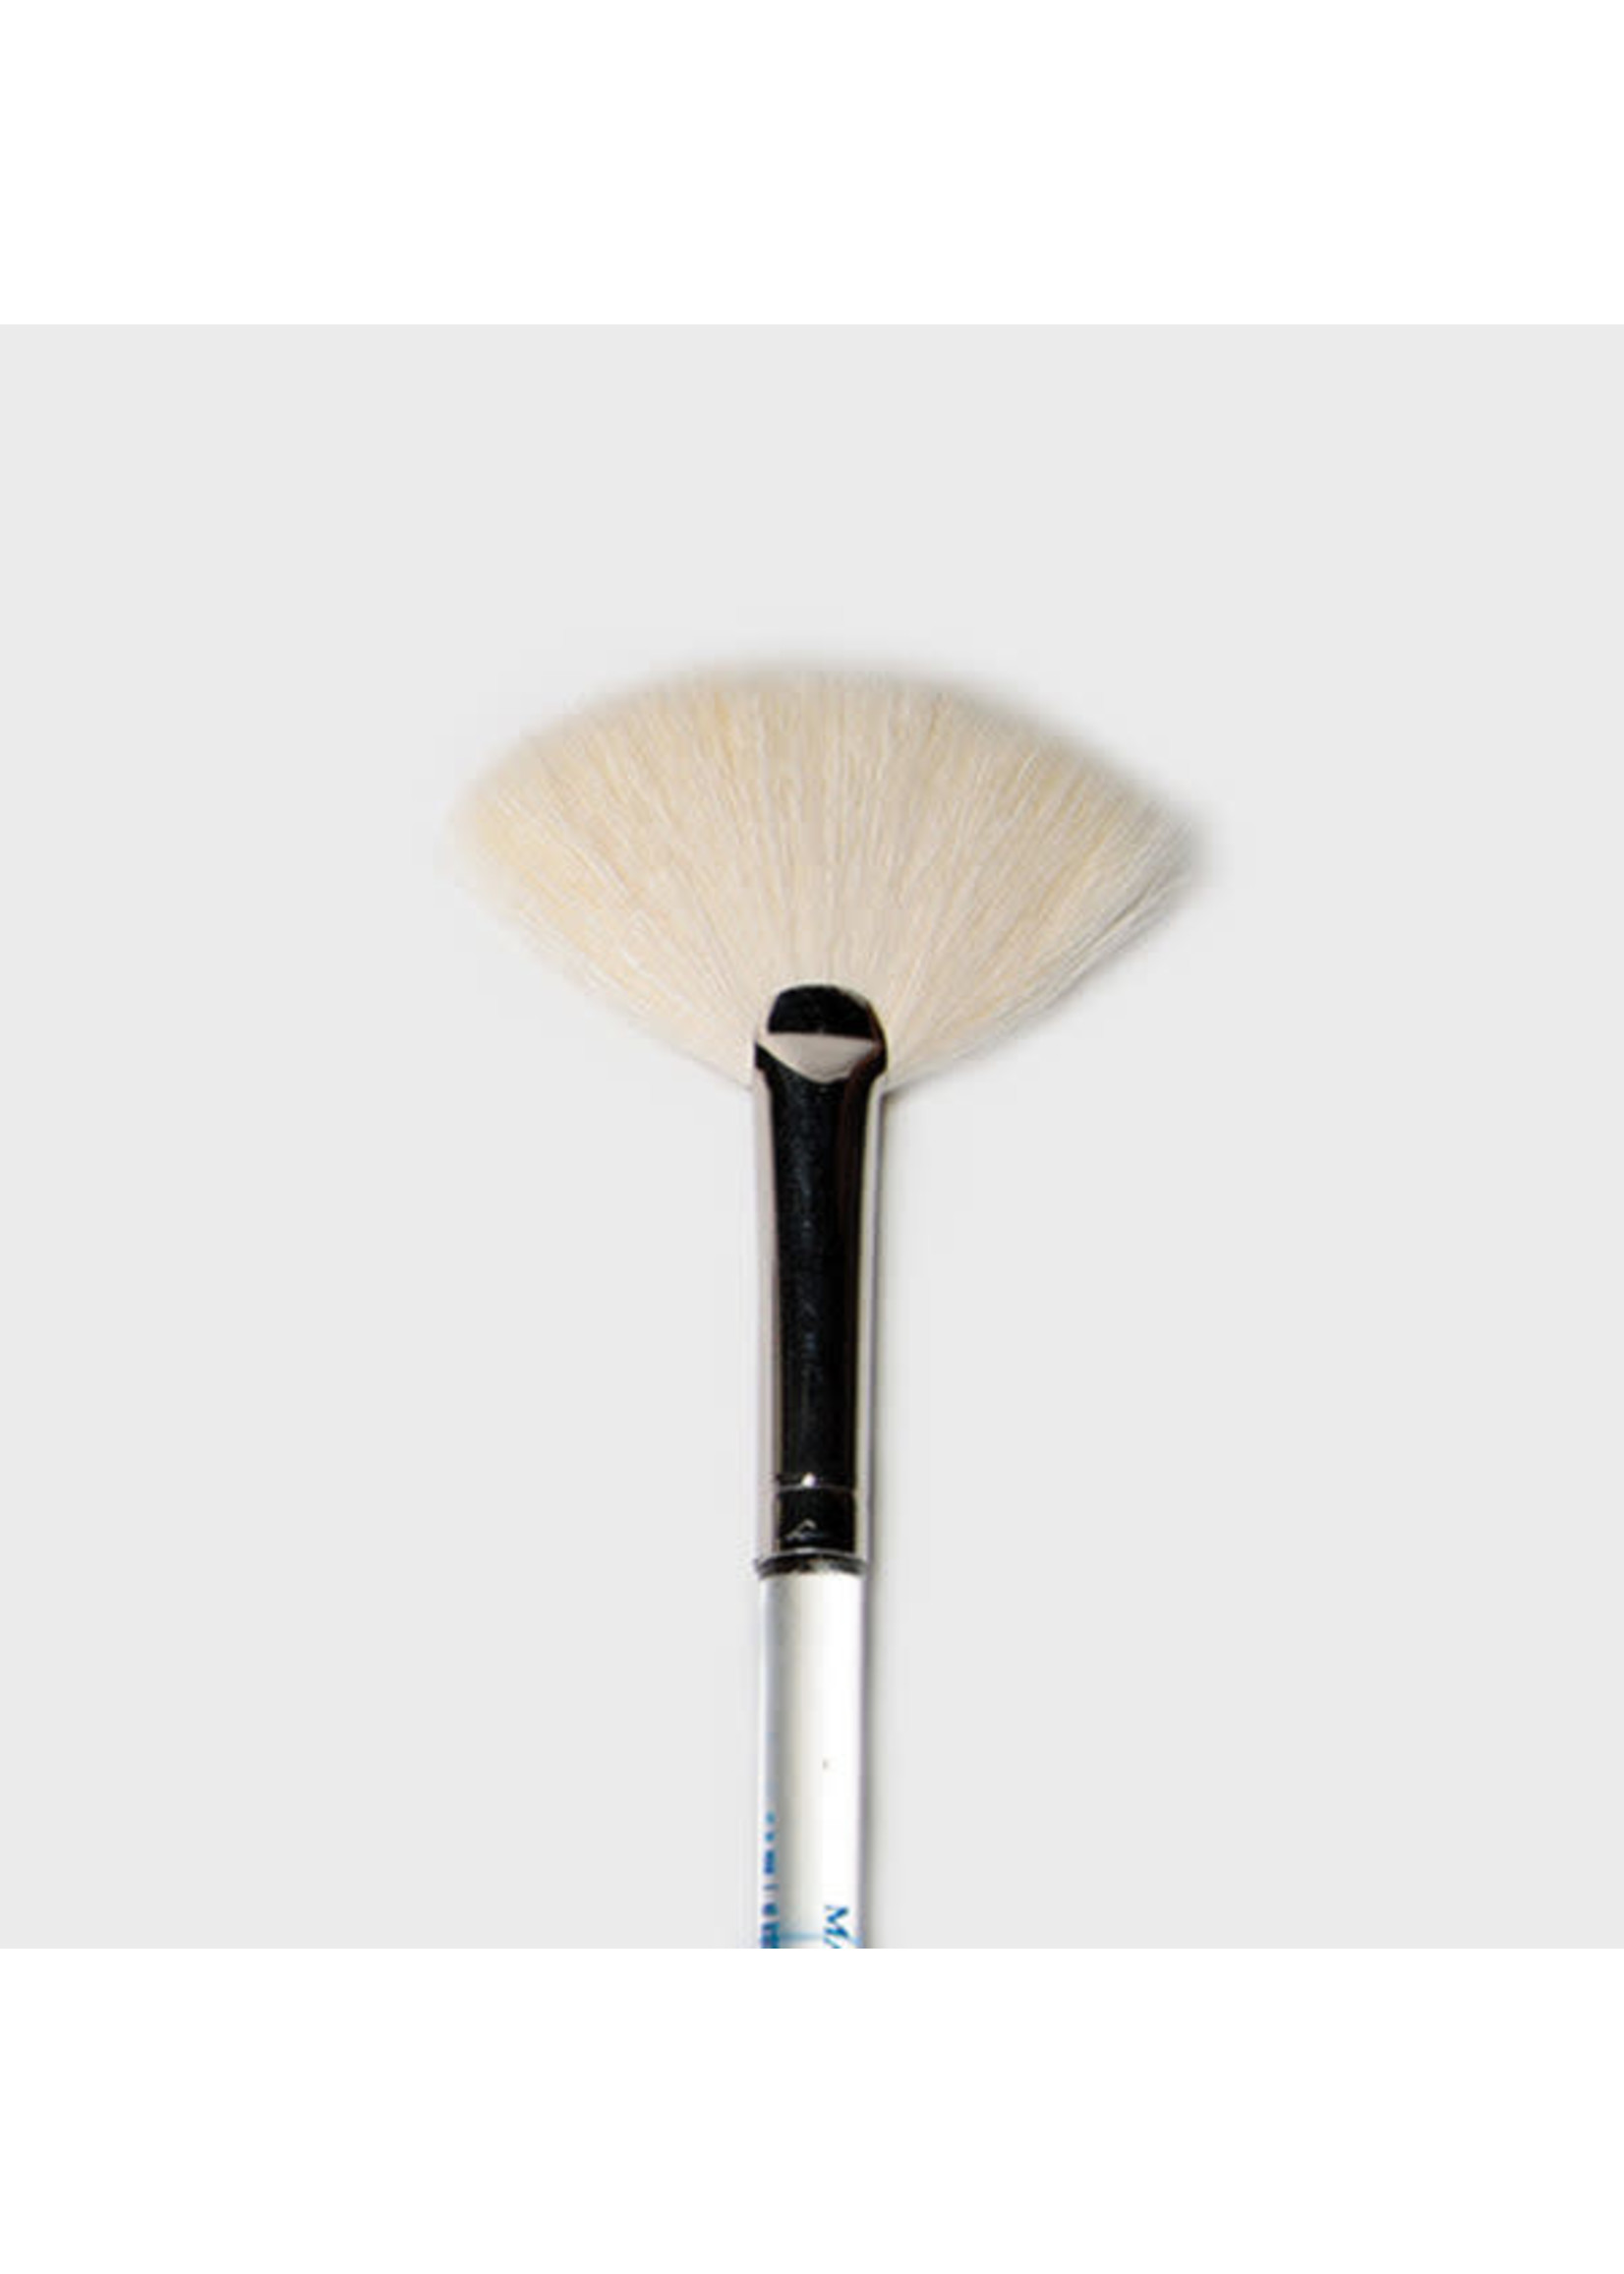 Mayco Coloramics Soft Fan Brush #8 RB140